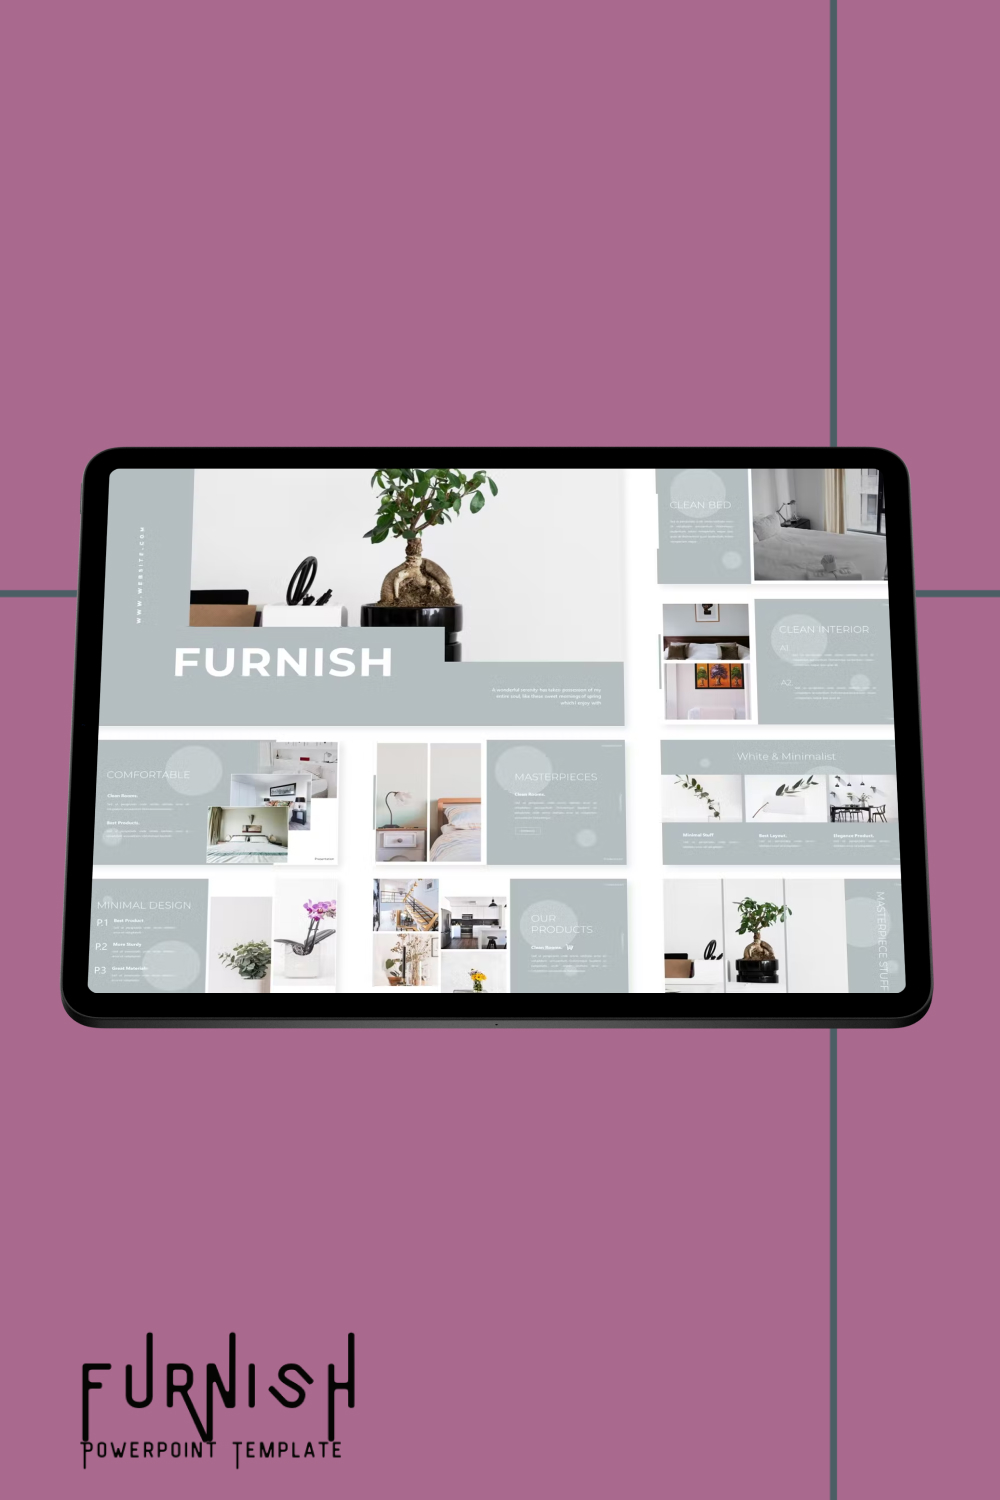 Illustrations of pinterest furnish powerpoint template.